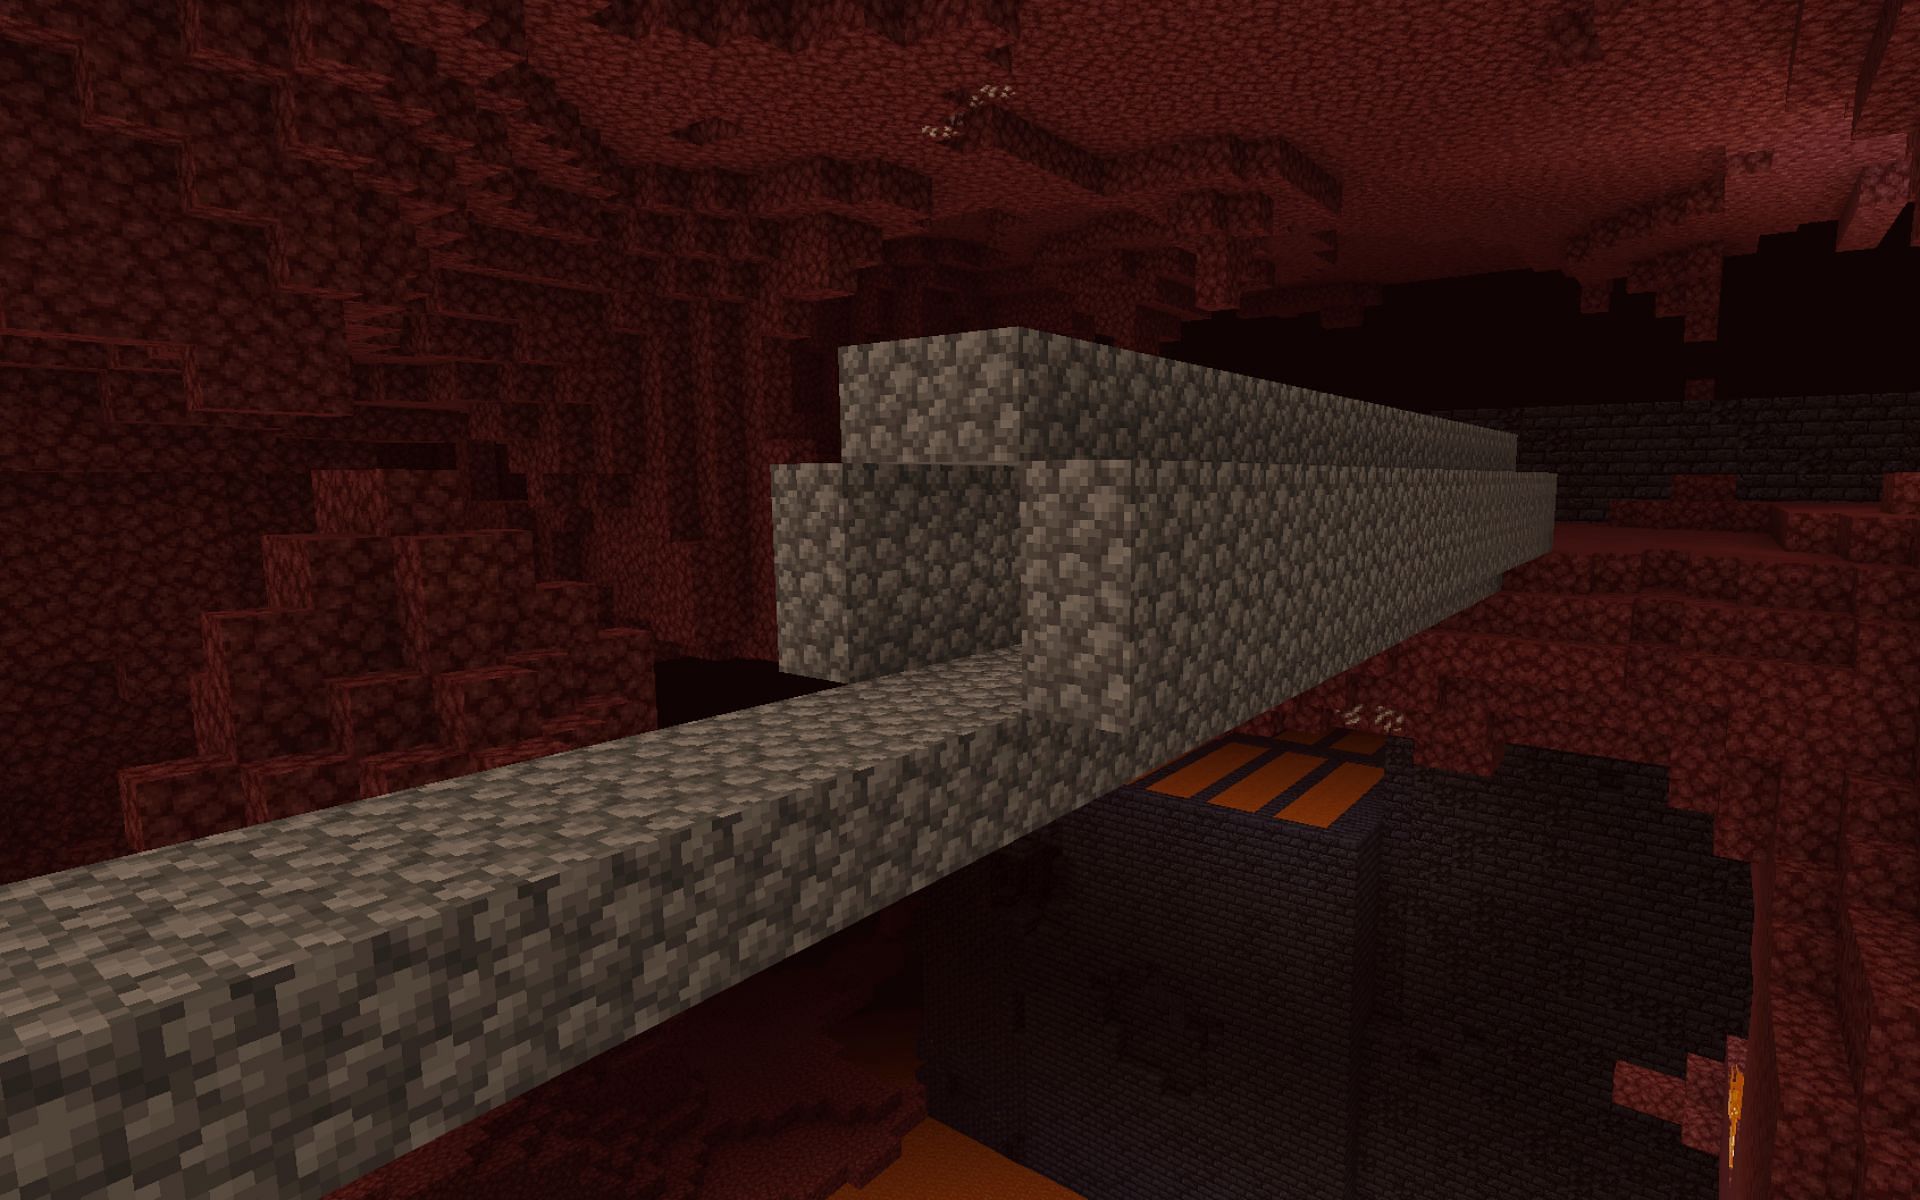 Cover bridges from all sides to stay safe in Minecraft&#039;s Nether realm (Image via Mojang)